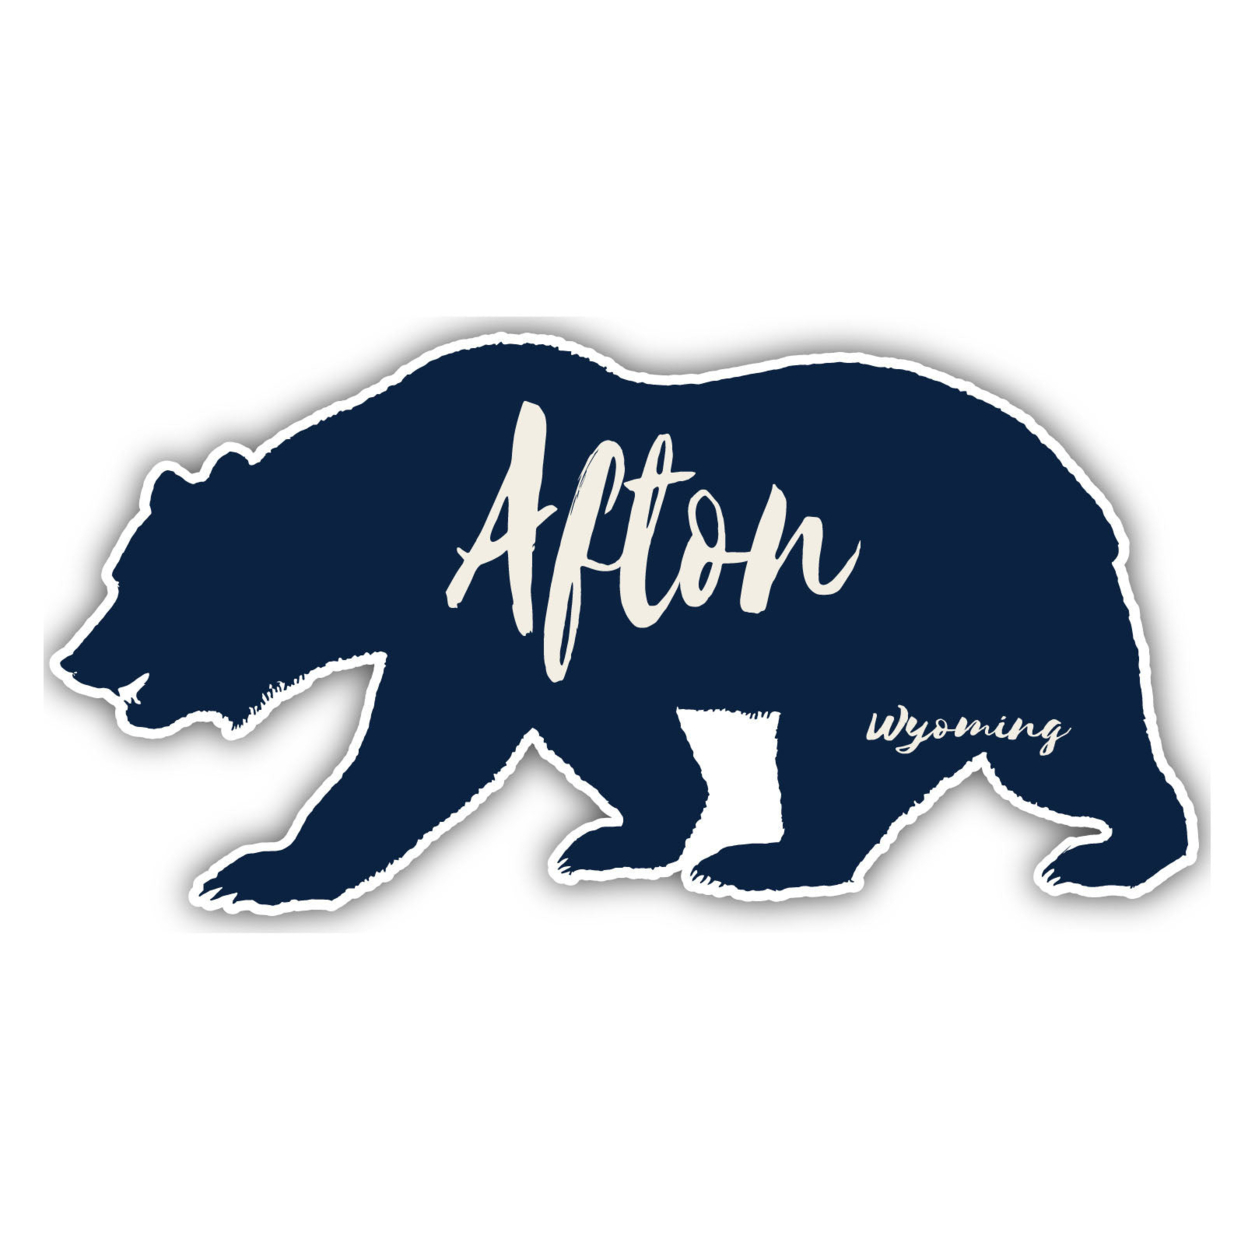 Afton Wyoming Souvenir Decorative Stickers (Choose Theme And Size) - Single Unit, 6-Inch, Bear